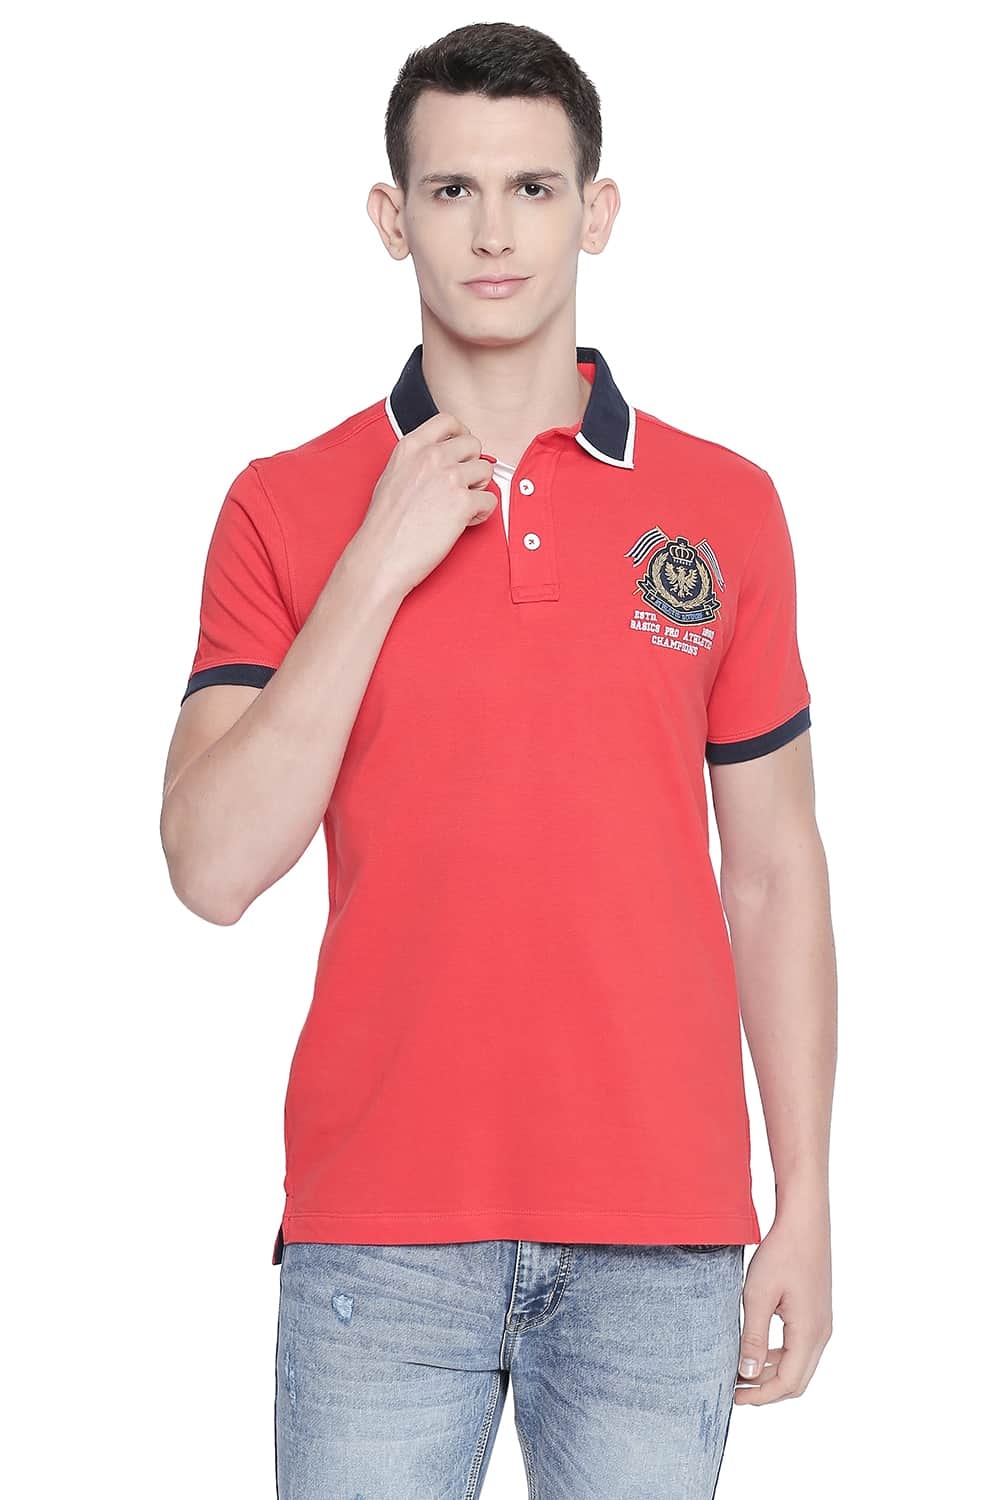 Basics | Basics Muscle Fit Fiery Red Rugby Polo T Shirt